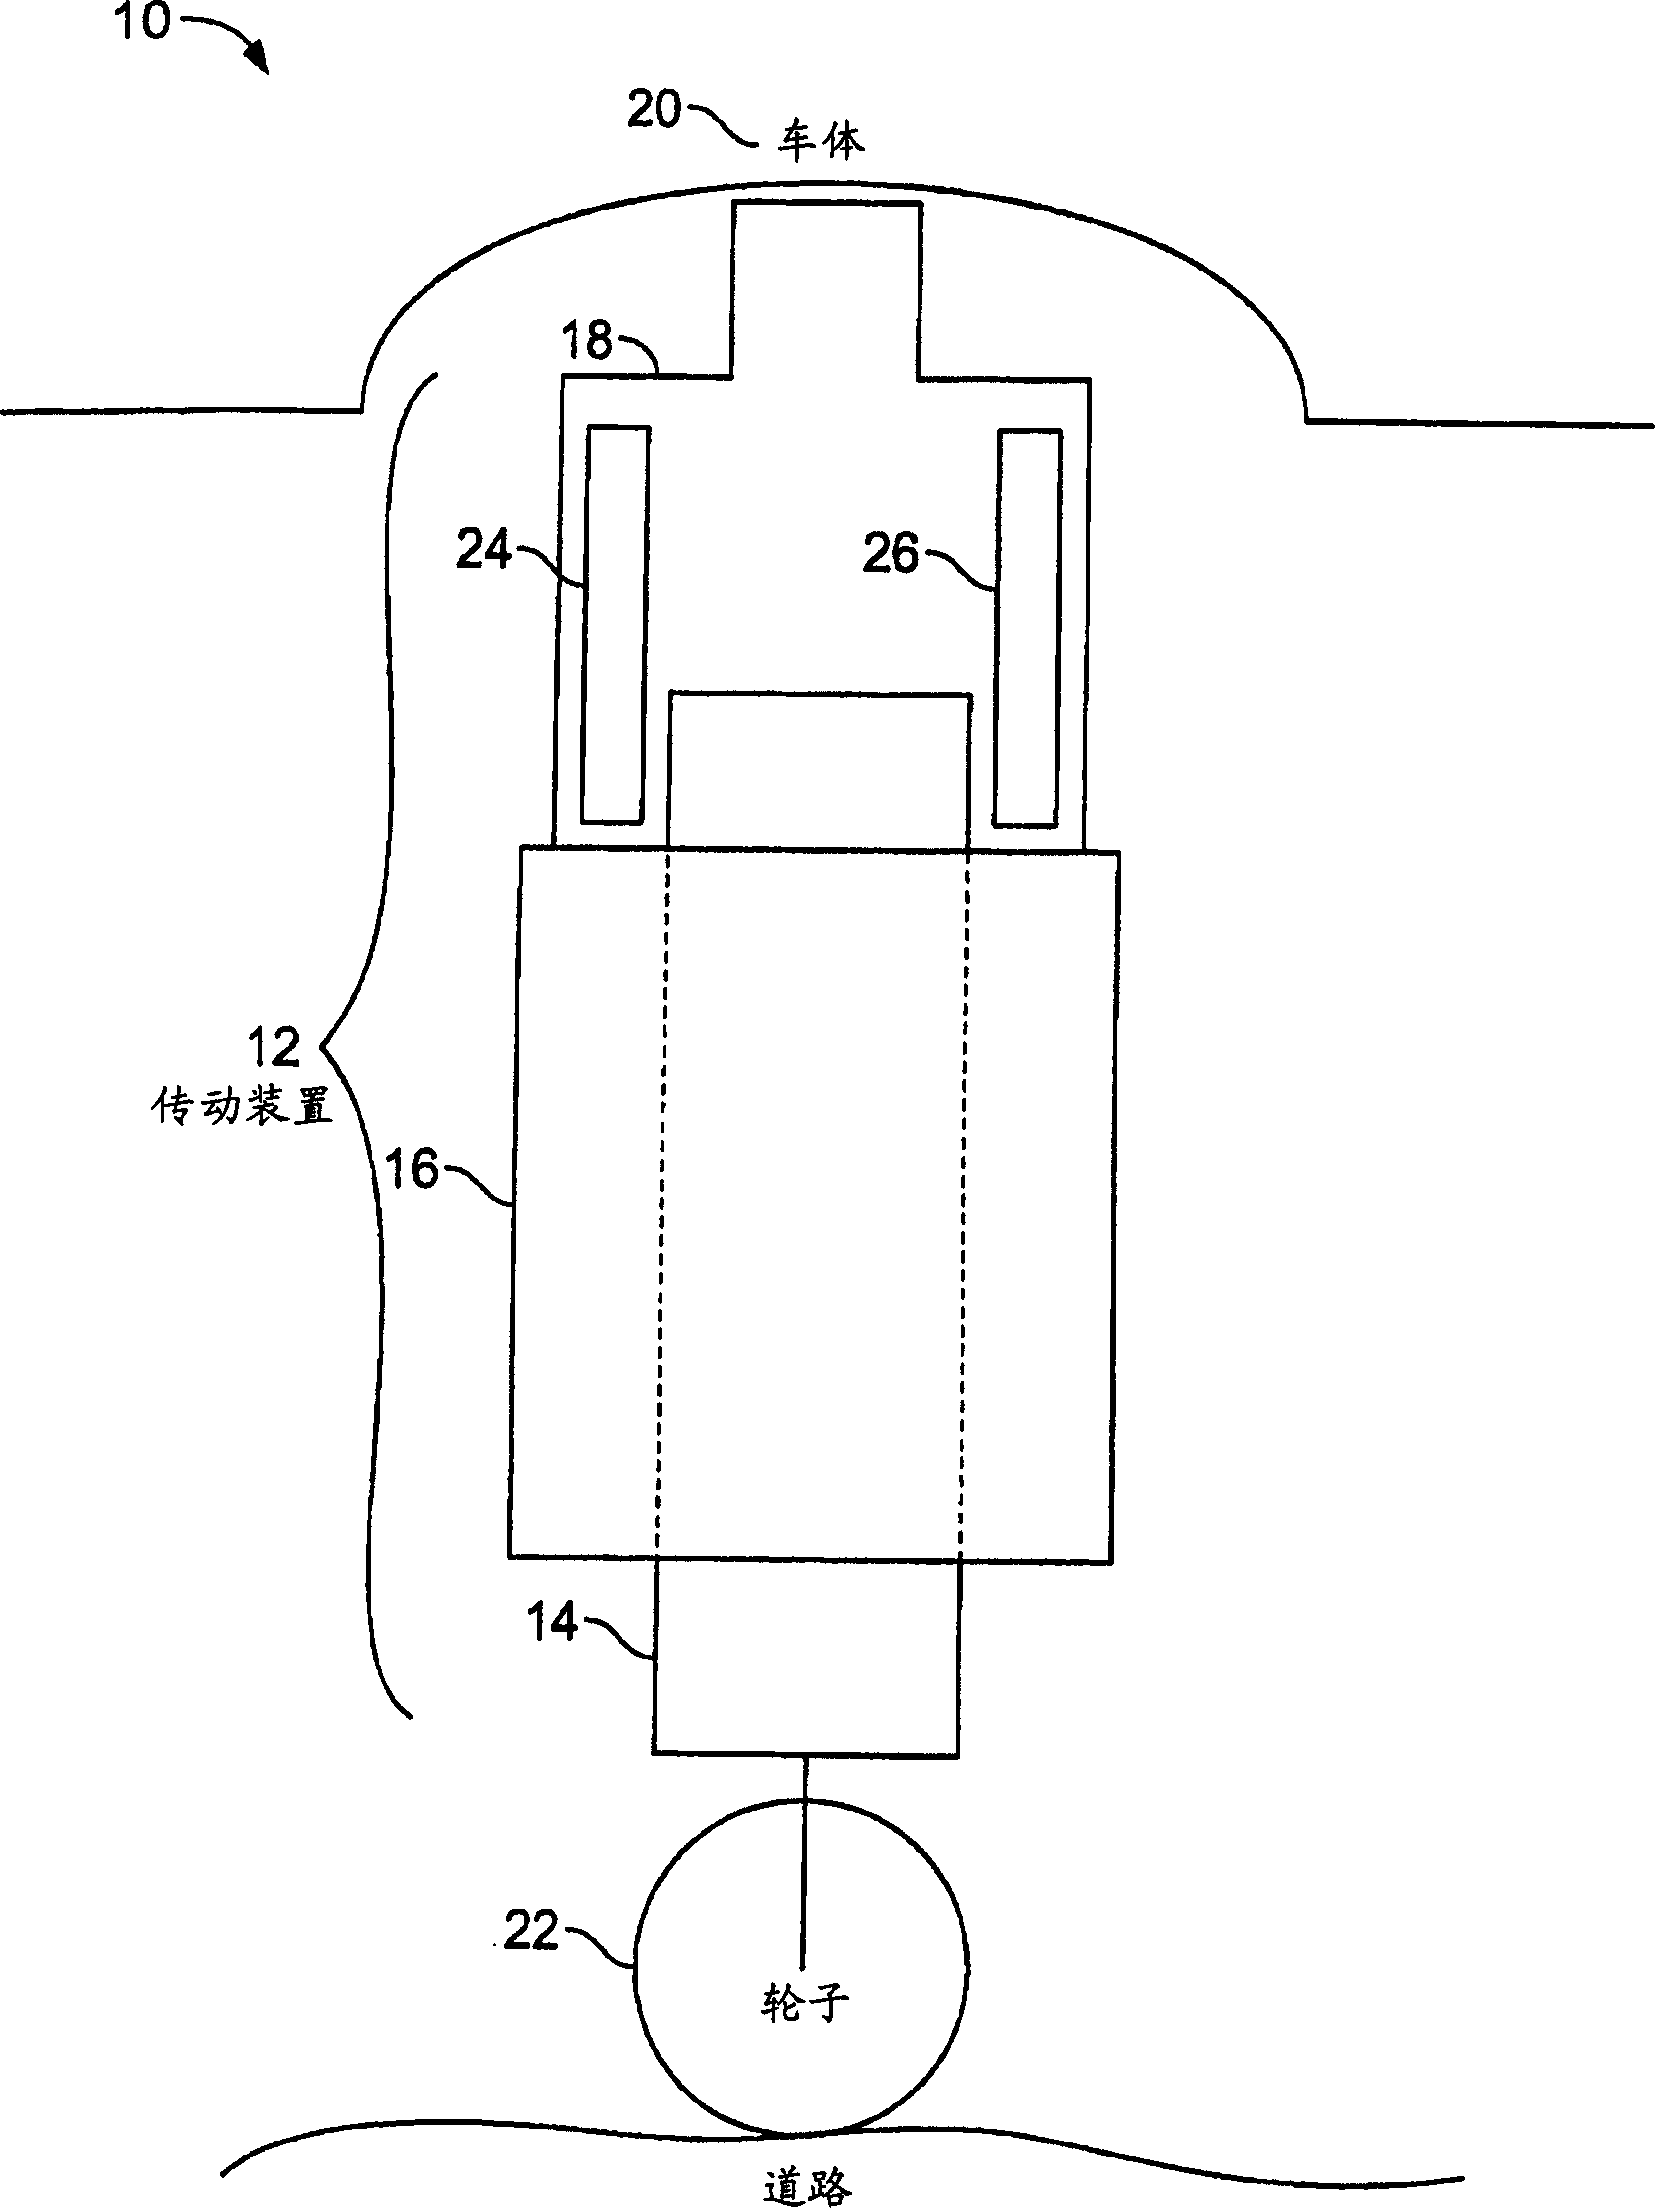 Electromagnetic interference filter